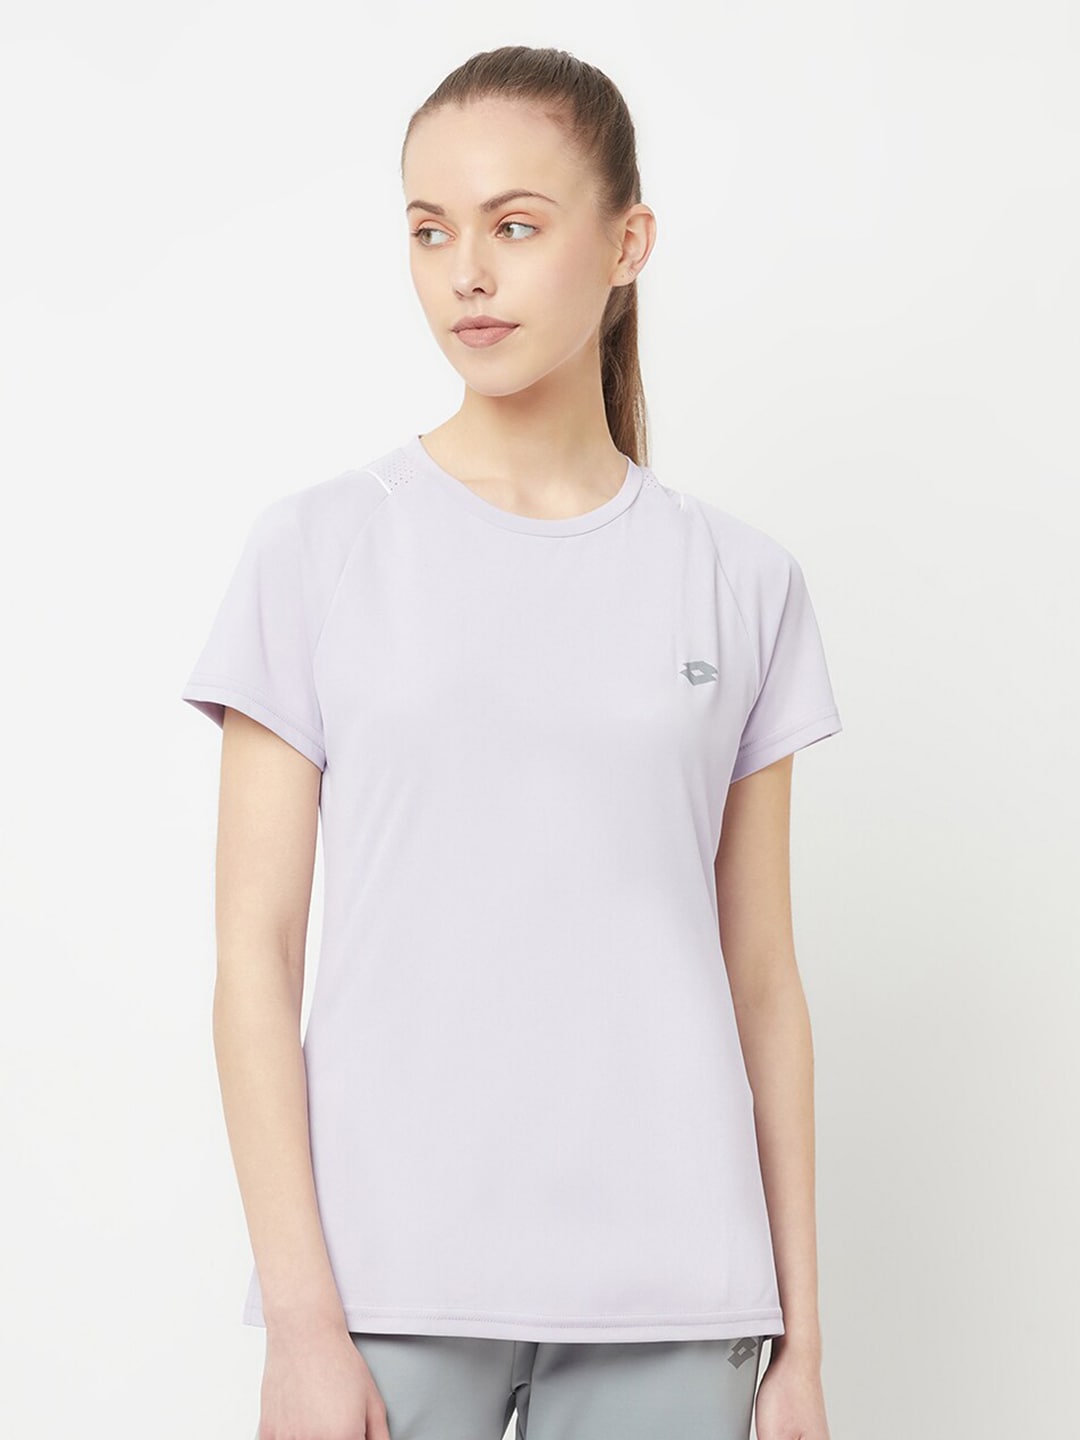 Lotto Women Grey Solid Raglan Sleeves Sports T-shirt Price in India